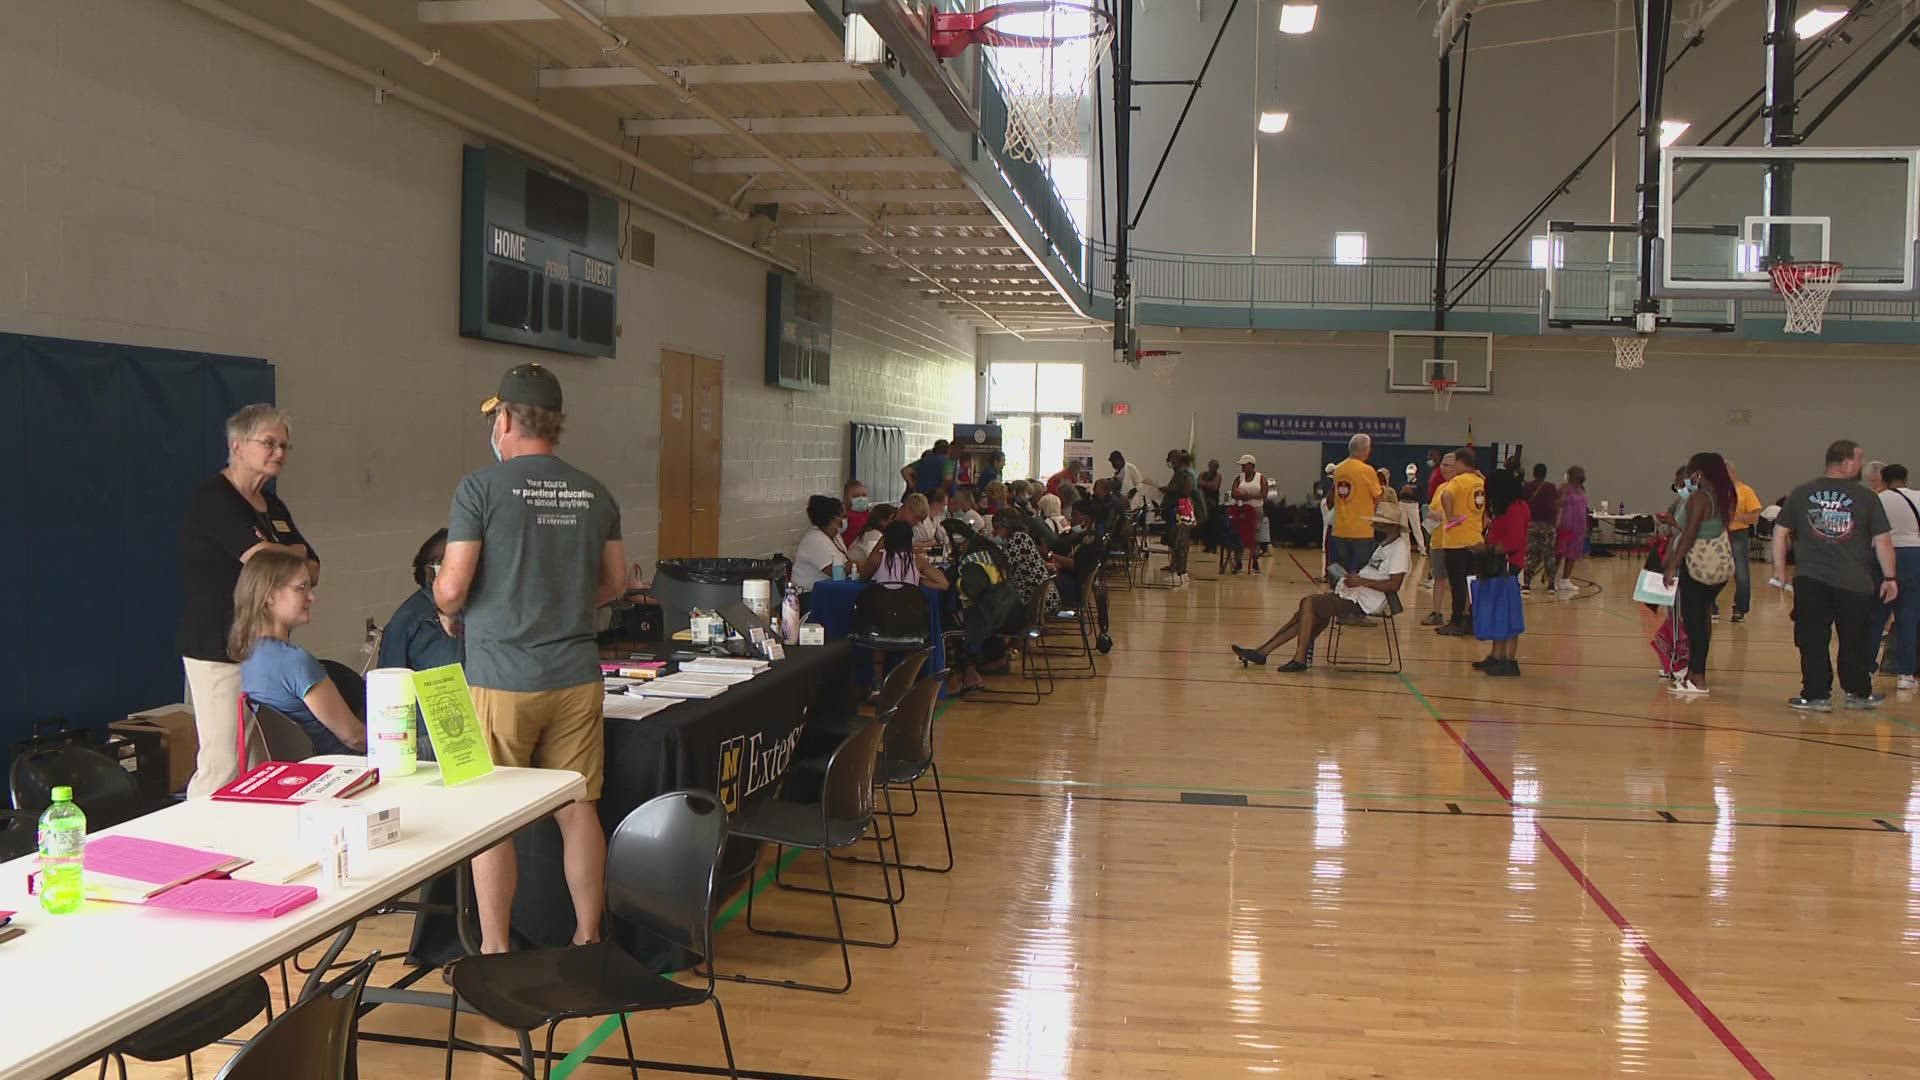 Several Resource Centers will be open for flood victims this weekend in both St. Louis and East St. Louis. Some St. Louis centers hit capacity this week.